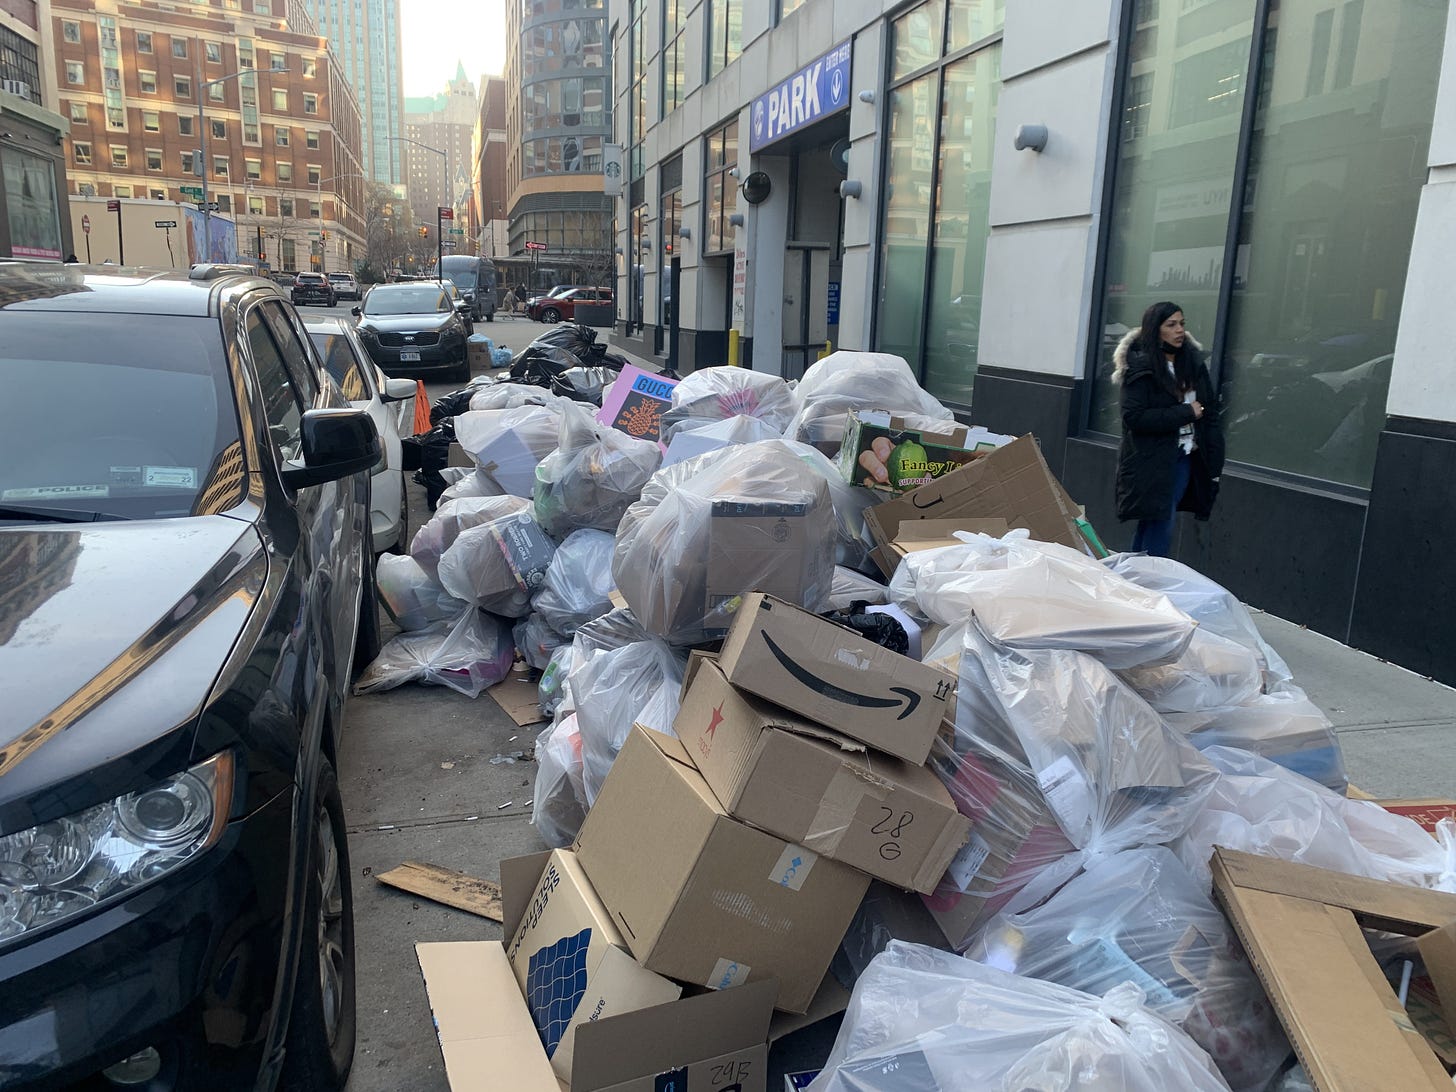 TRASH CITY: Here's Why New York is So Filthy – Streetsblog New York City